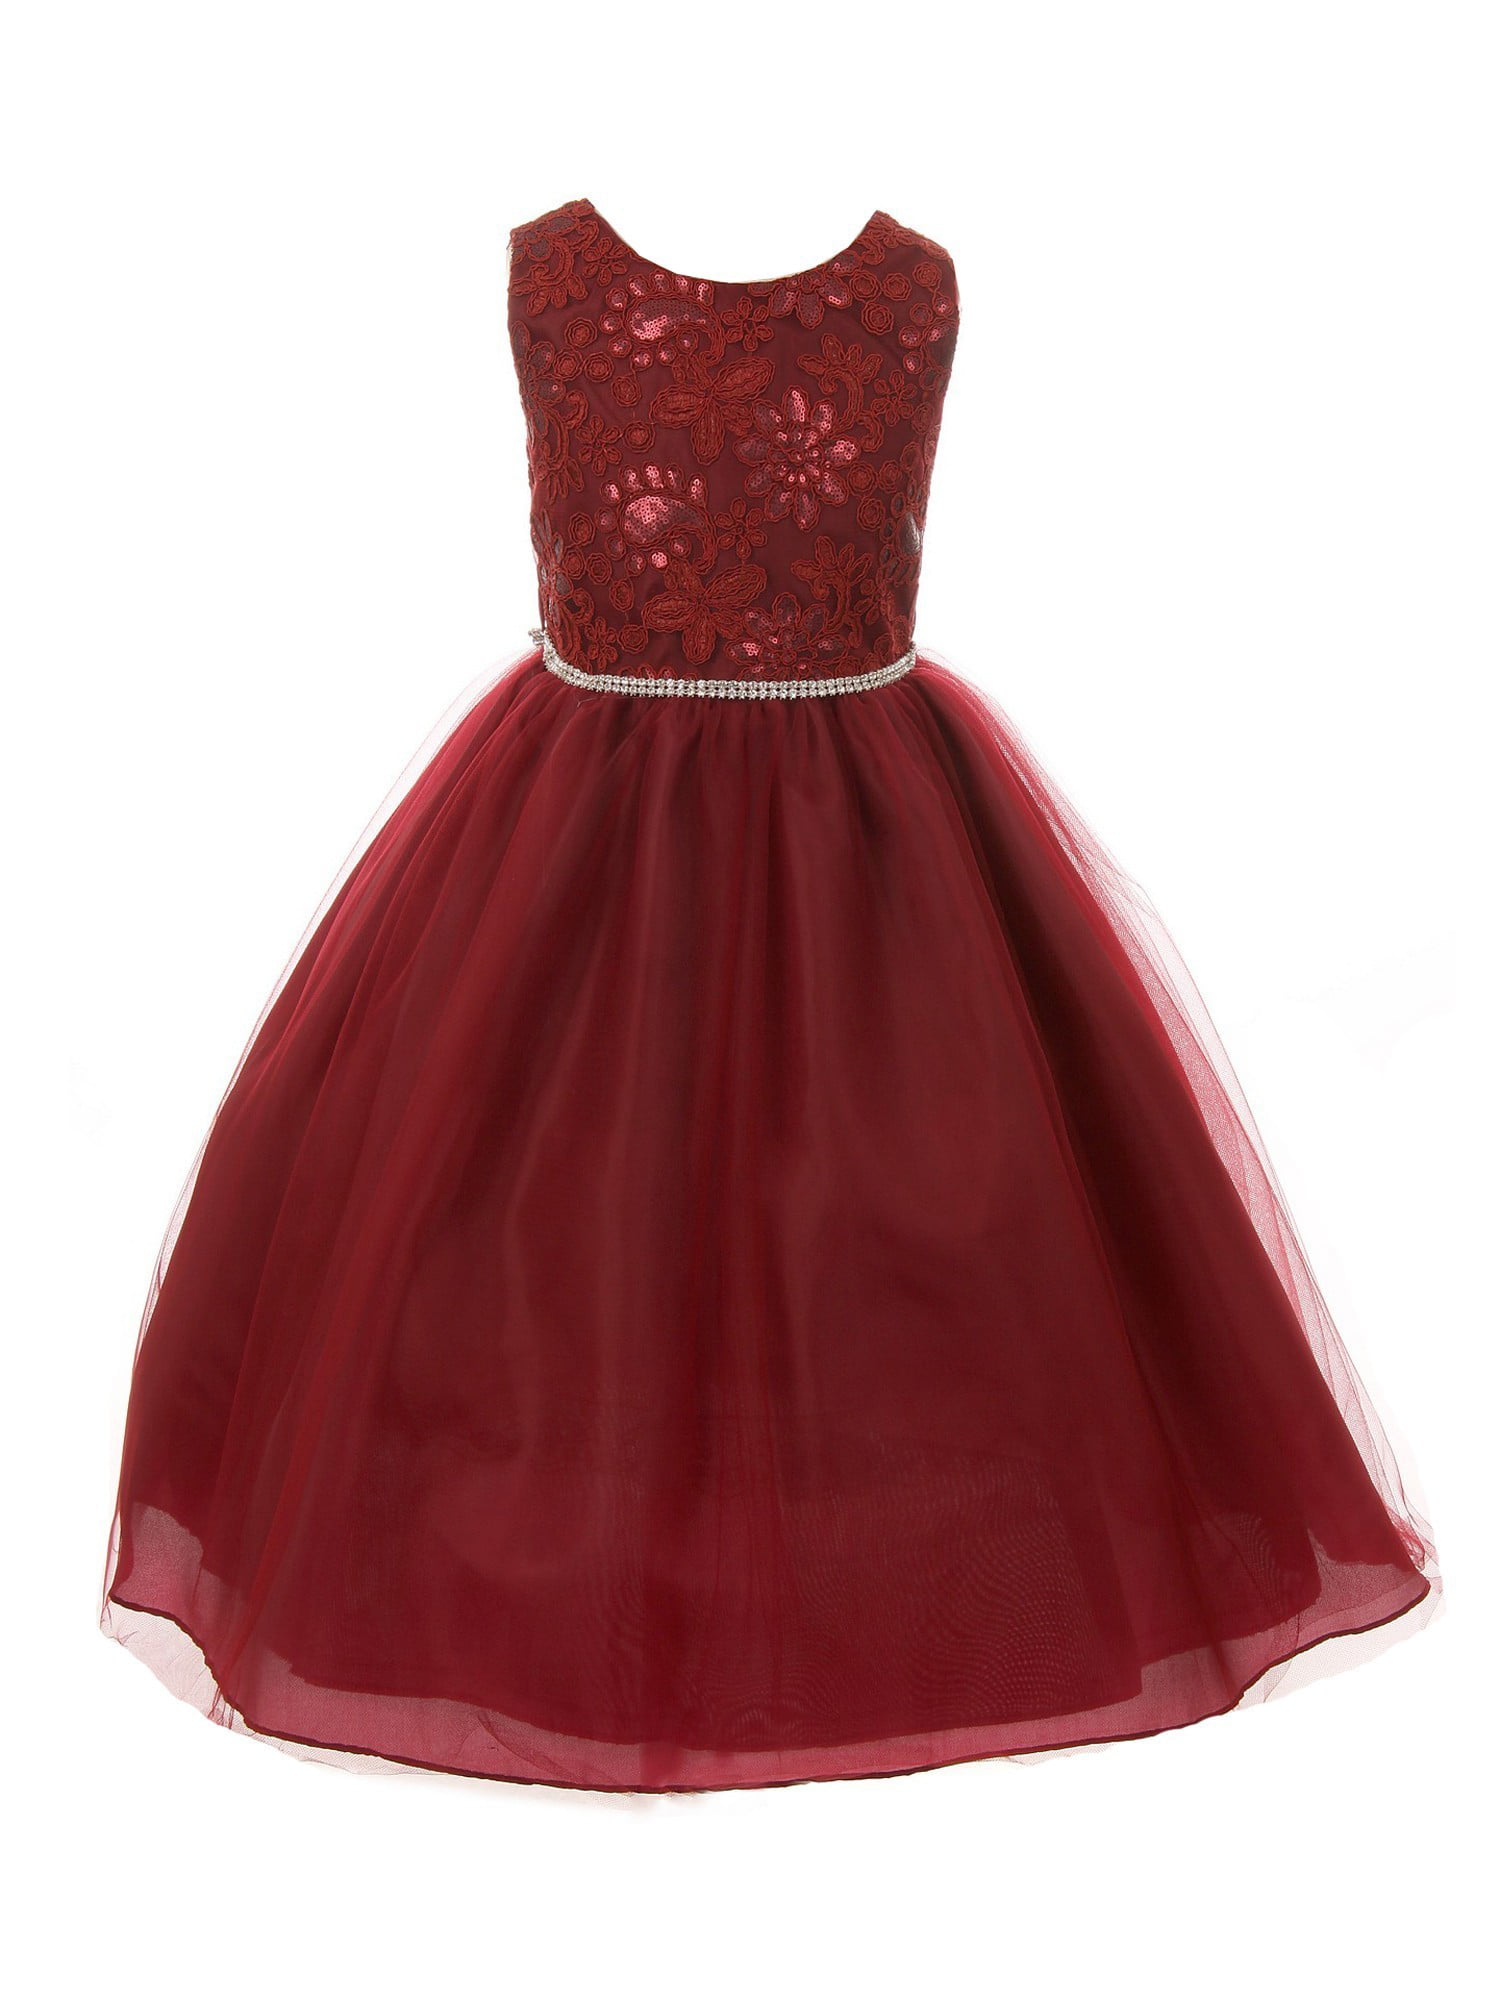 Shanil - Girls Burgundy Sequin Floral Embroidered Rhinestone Christmas ...